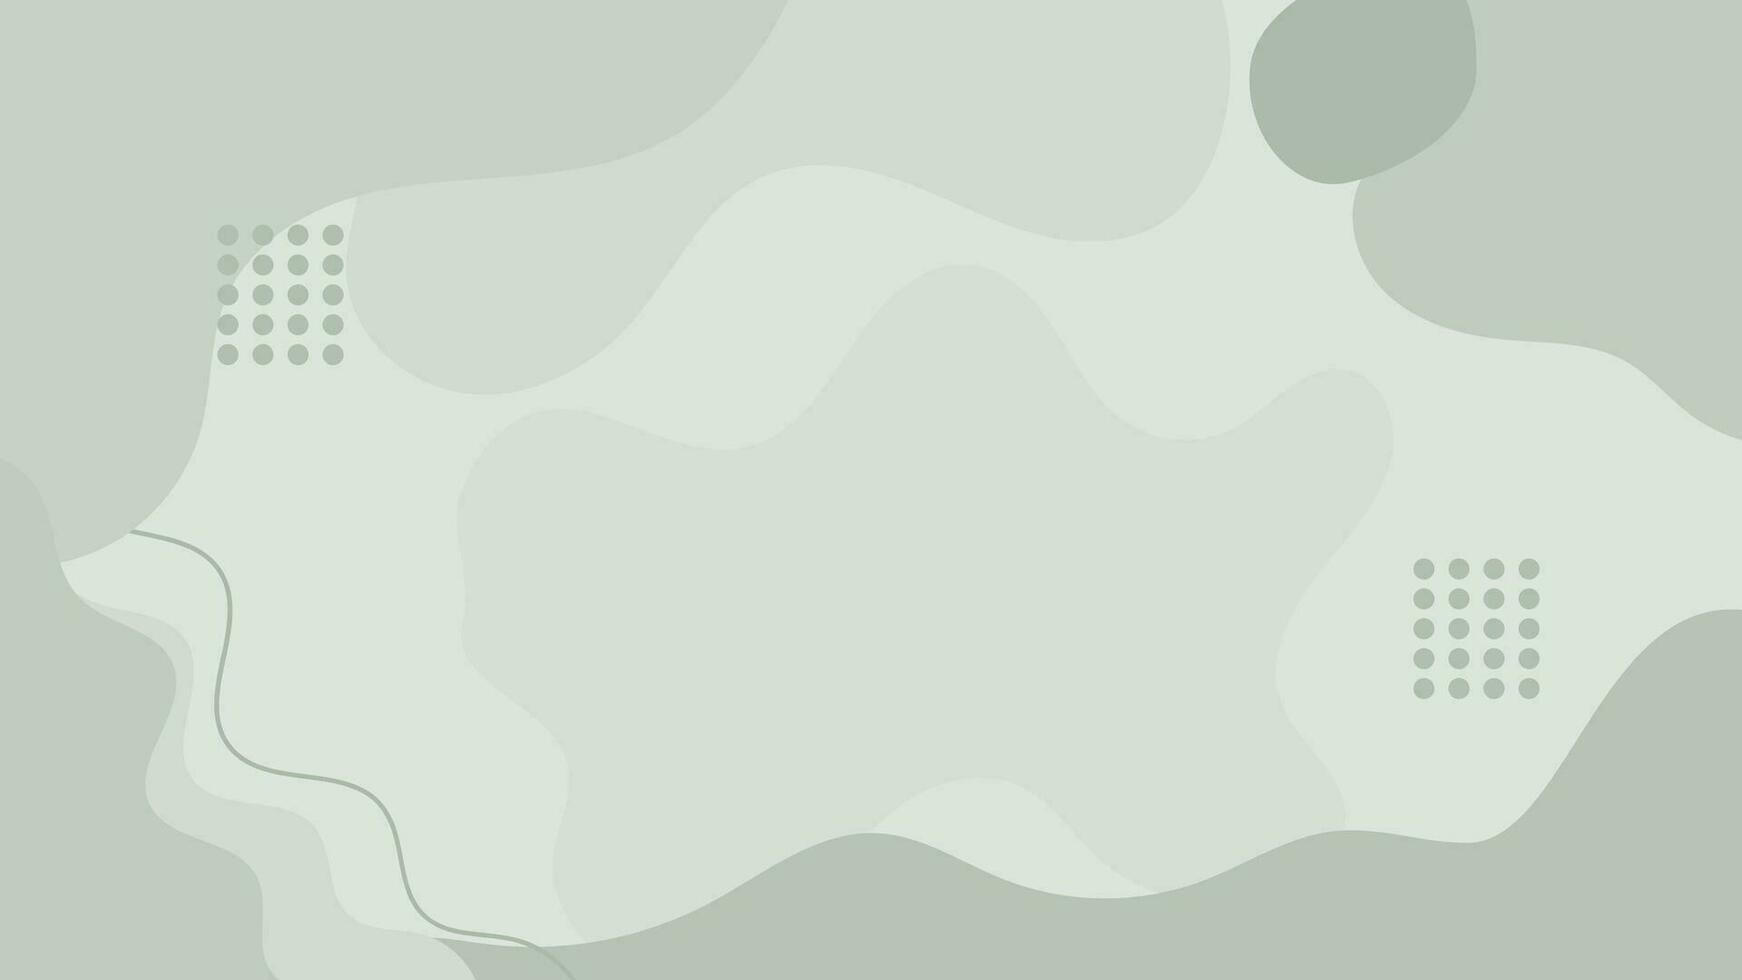 Abstract modern olive fluid shape background in flat design vector